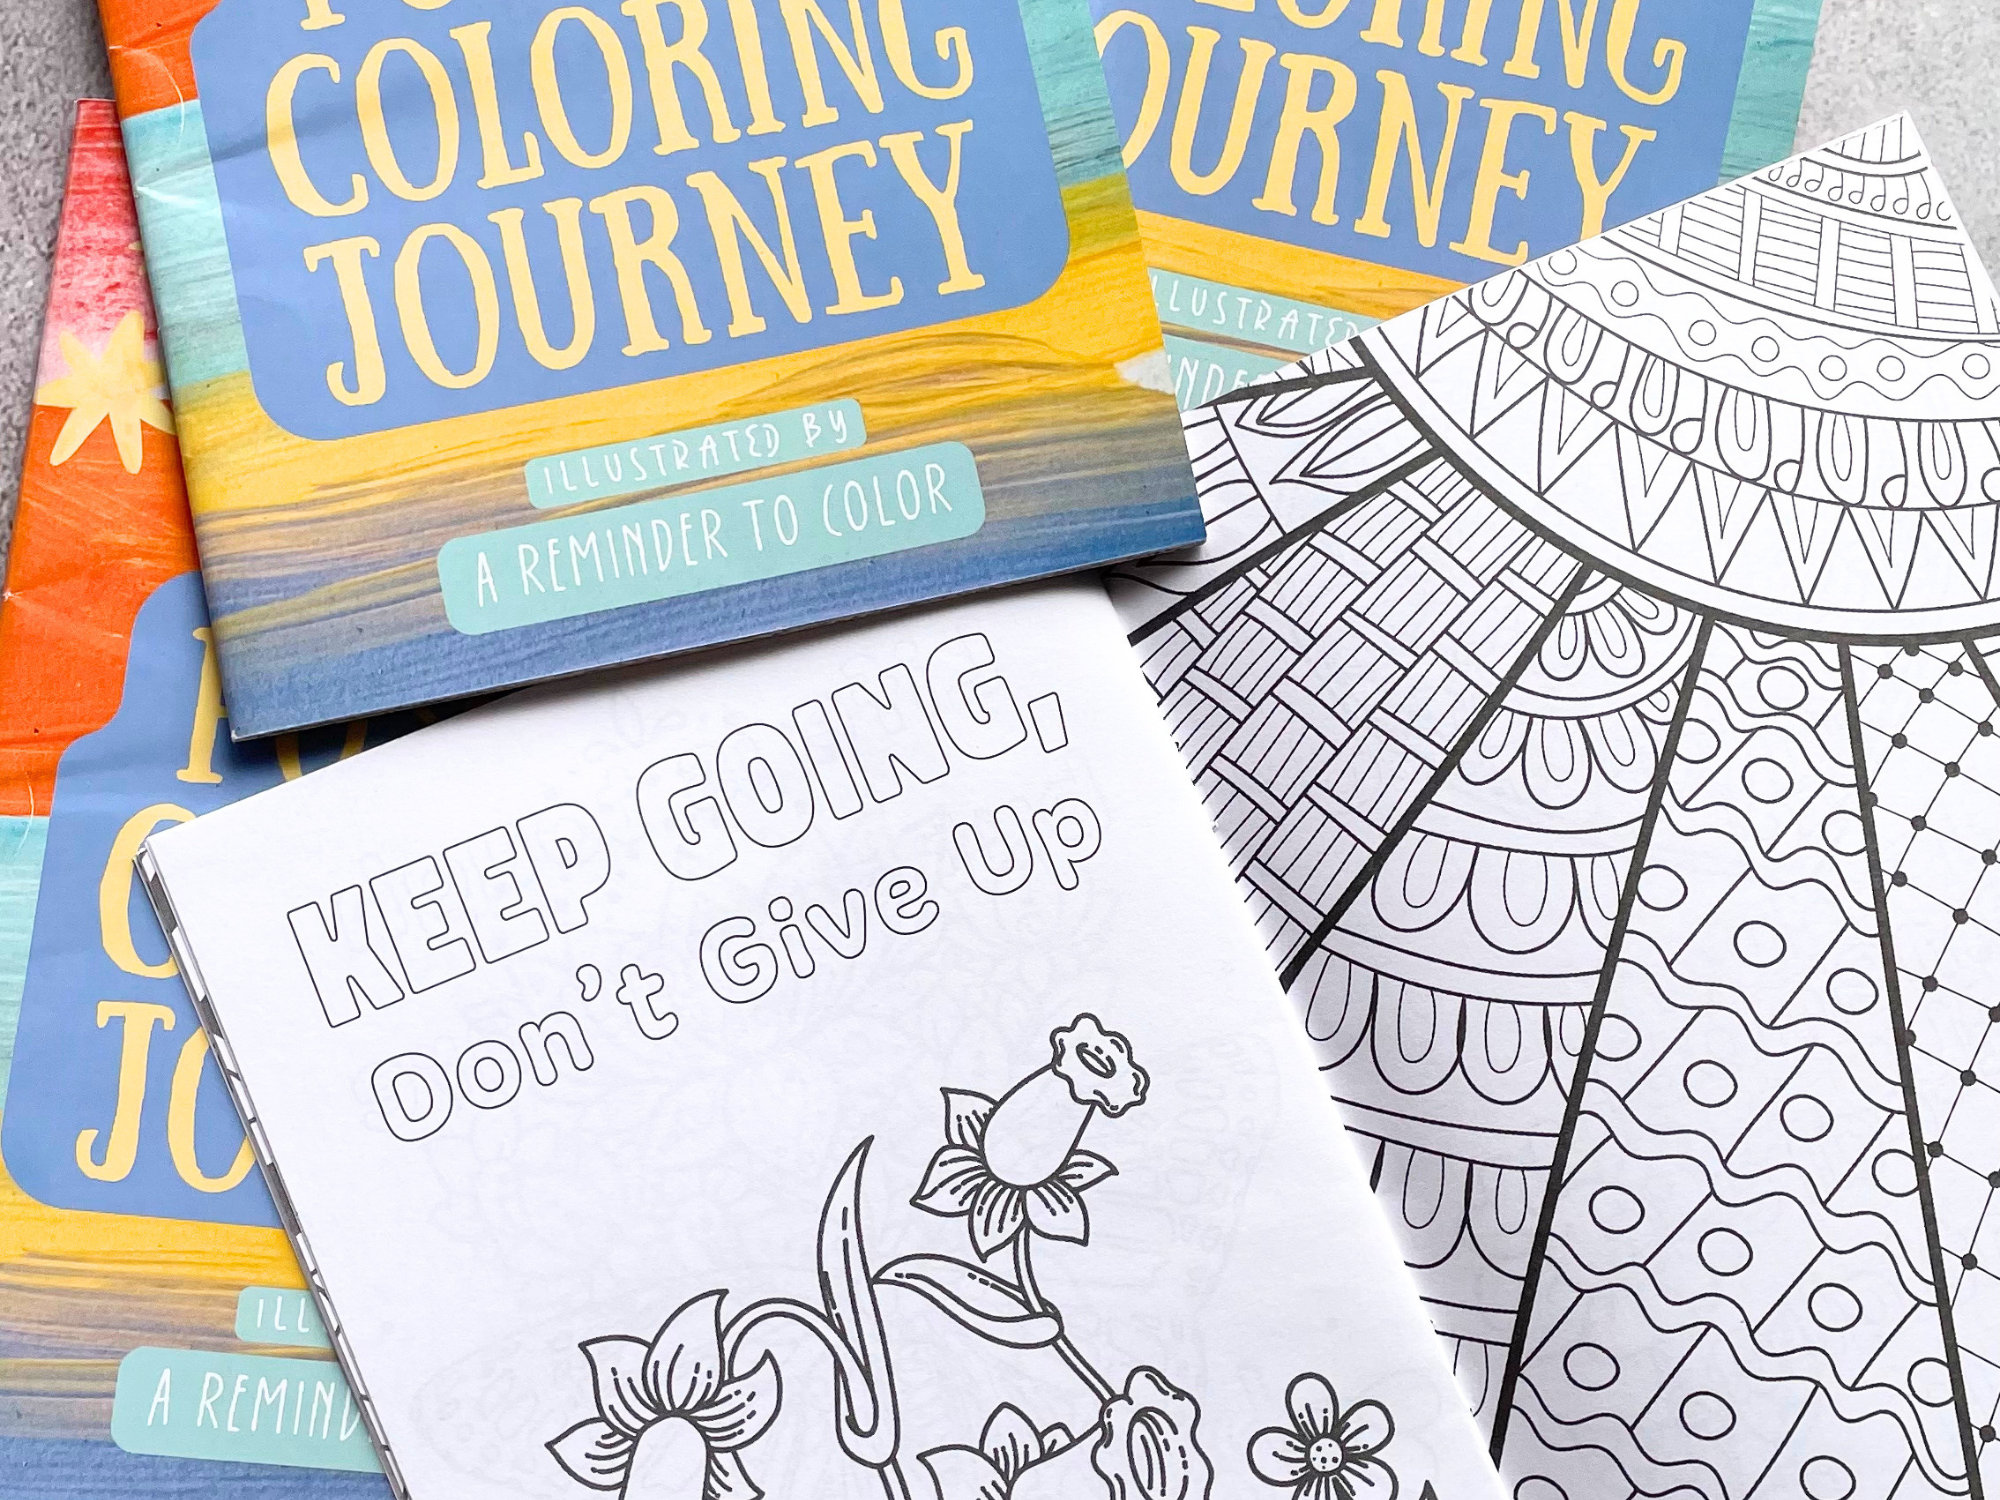 Color Therapy® Complete Adult Coloring Kit – MirthSlinger